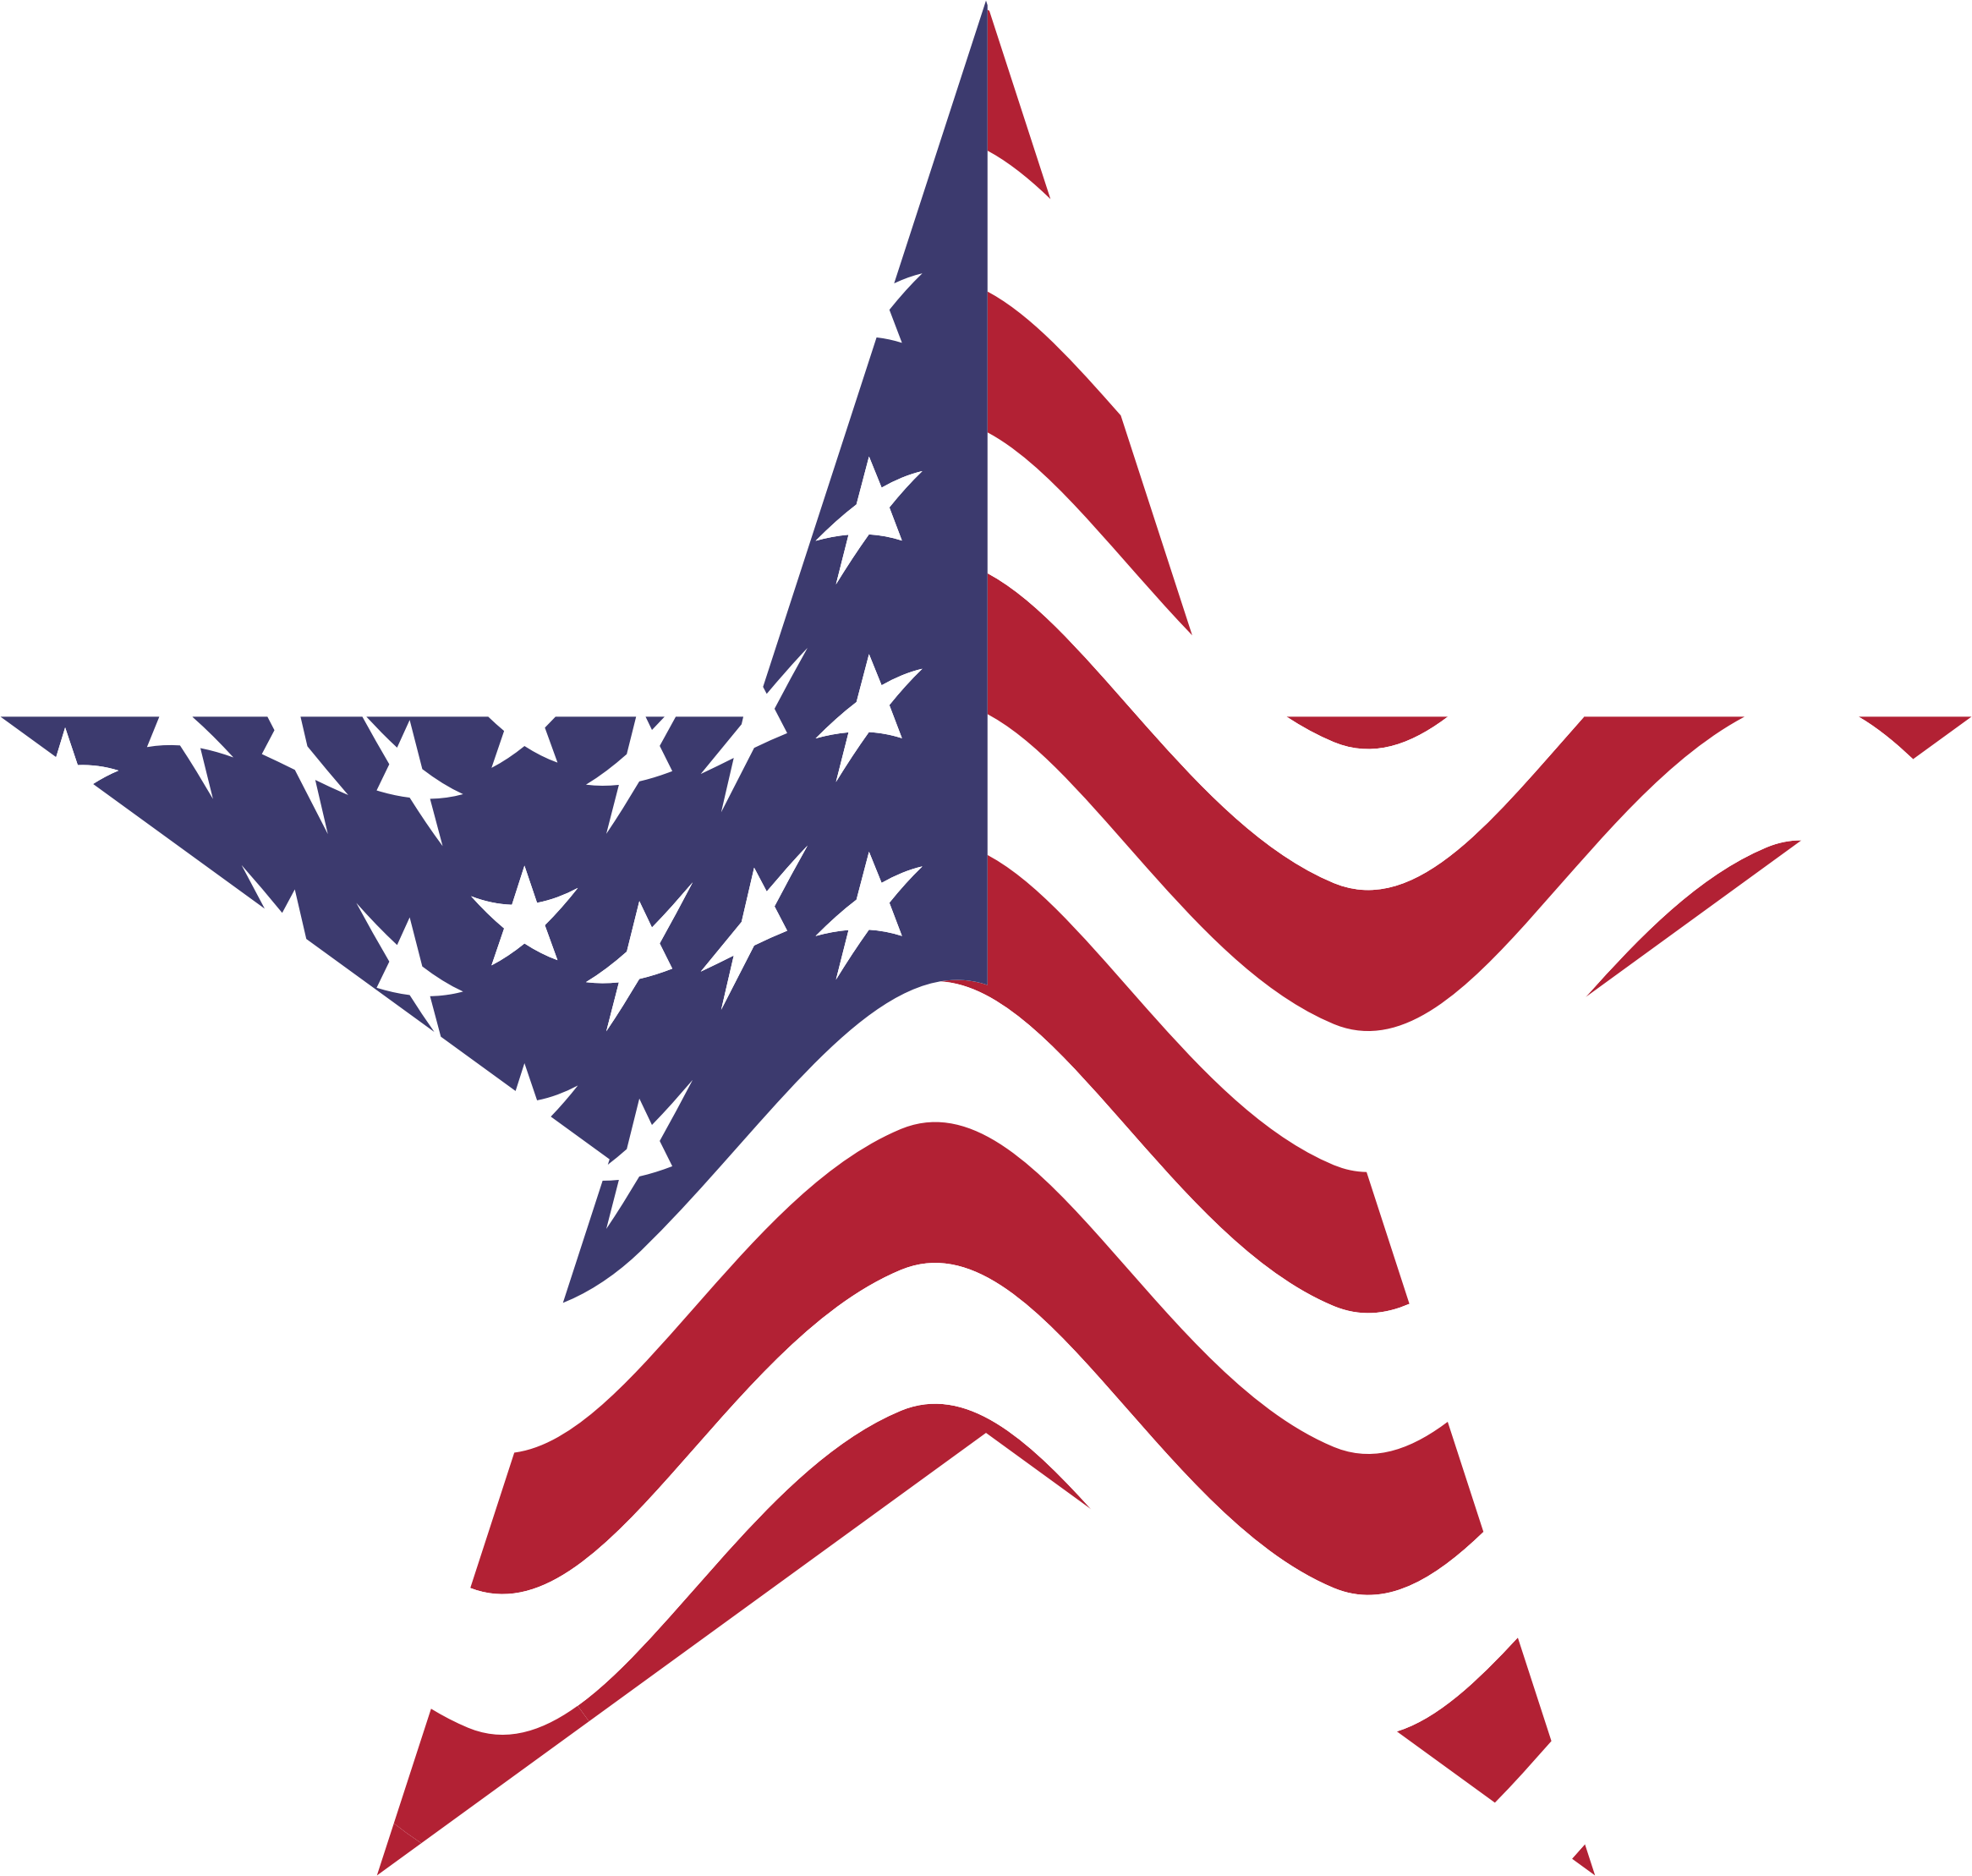 Flag of the United States Clip art - America Stars Cliparts png ...